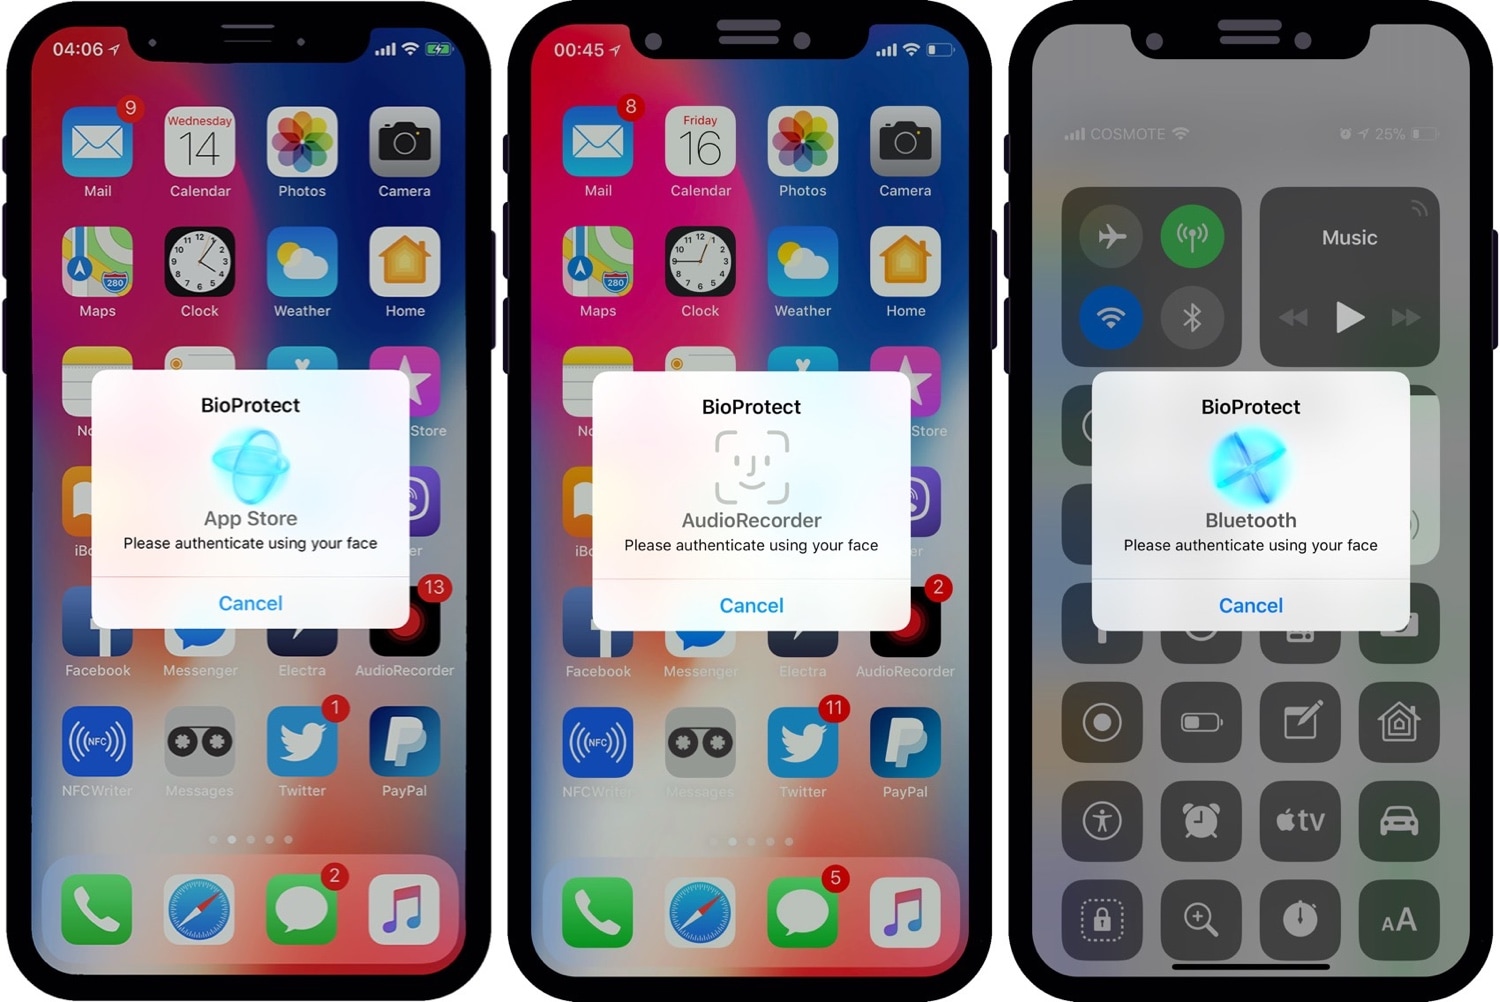 BioProtect XS app protection jailbreak tweak adds support for iOS 16 devices